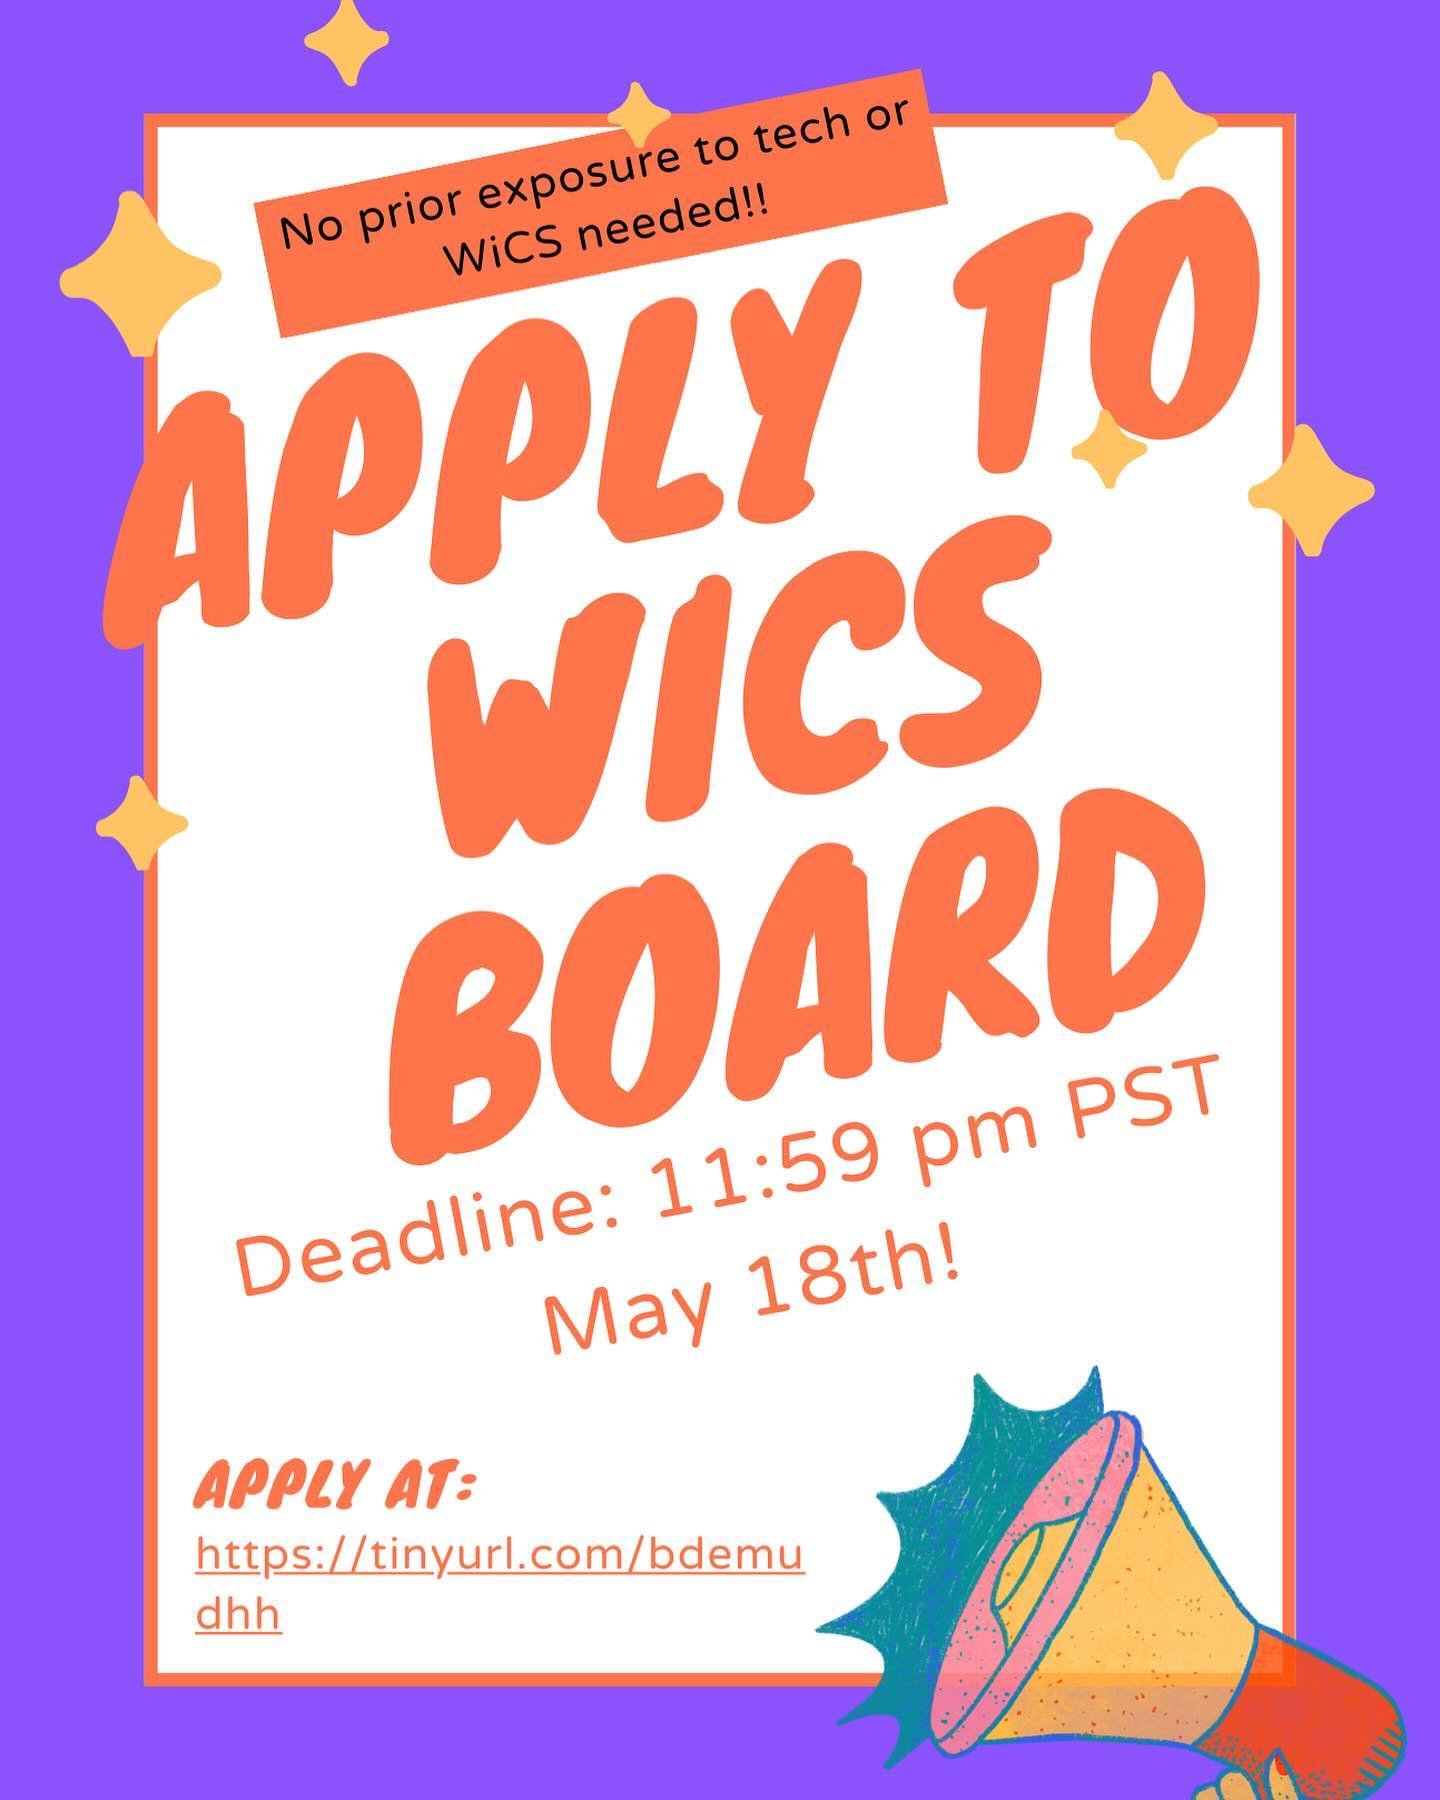 💜WiCS 2024-2025 Board are now open!💜
Apply here: https://tinyurl.com/bdemudhh
 
No matter your prior exposure to tech or WiCS, we welcome all women who have an interest in technology. If you are passionate about empowering &amp; supporting inclusio